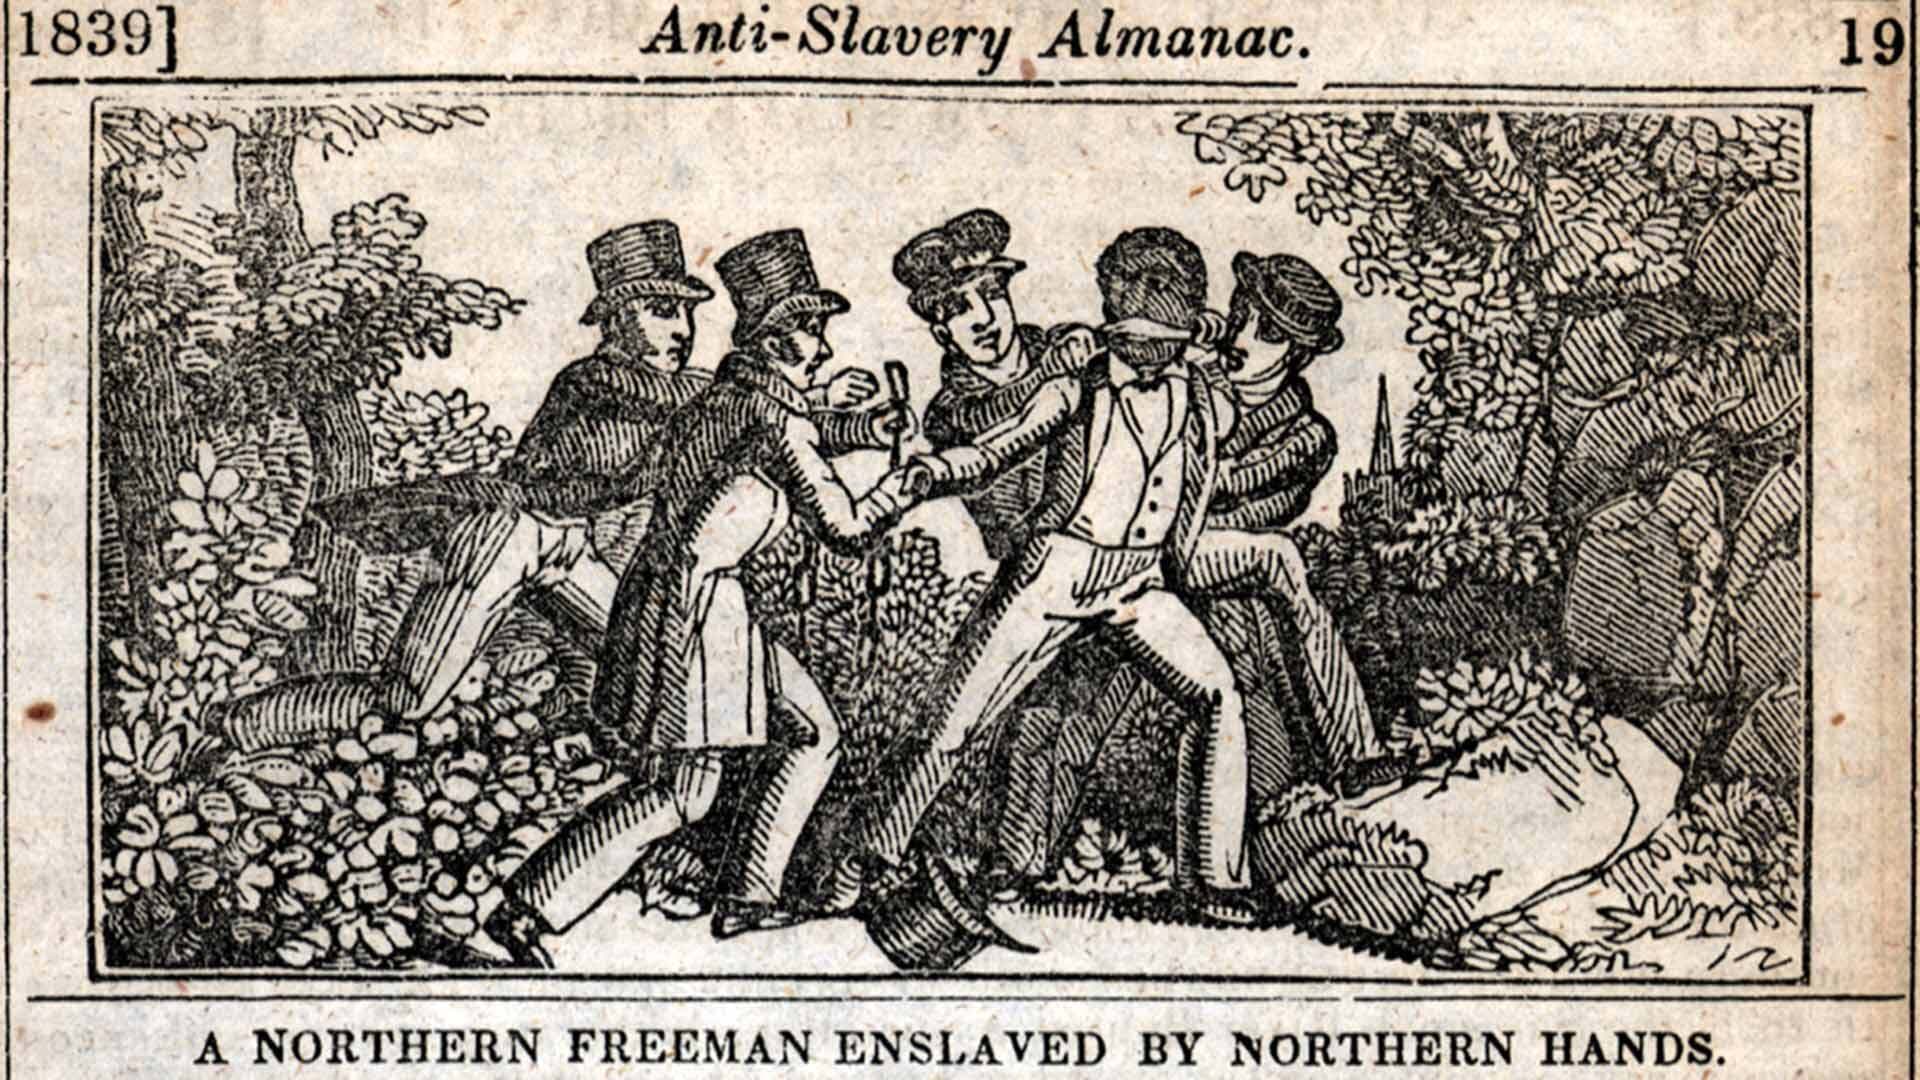 Illustration of African American man being kidnapped. The illustration reads, "Anti-Slavery Almanac. A Northern Freeman Enslaved by Northern Hands."